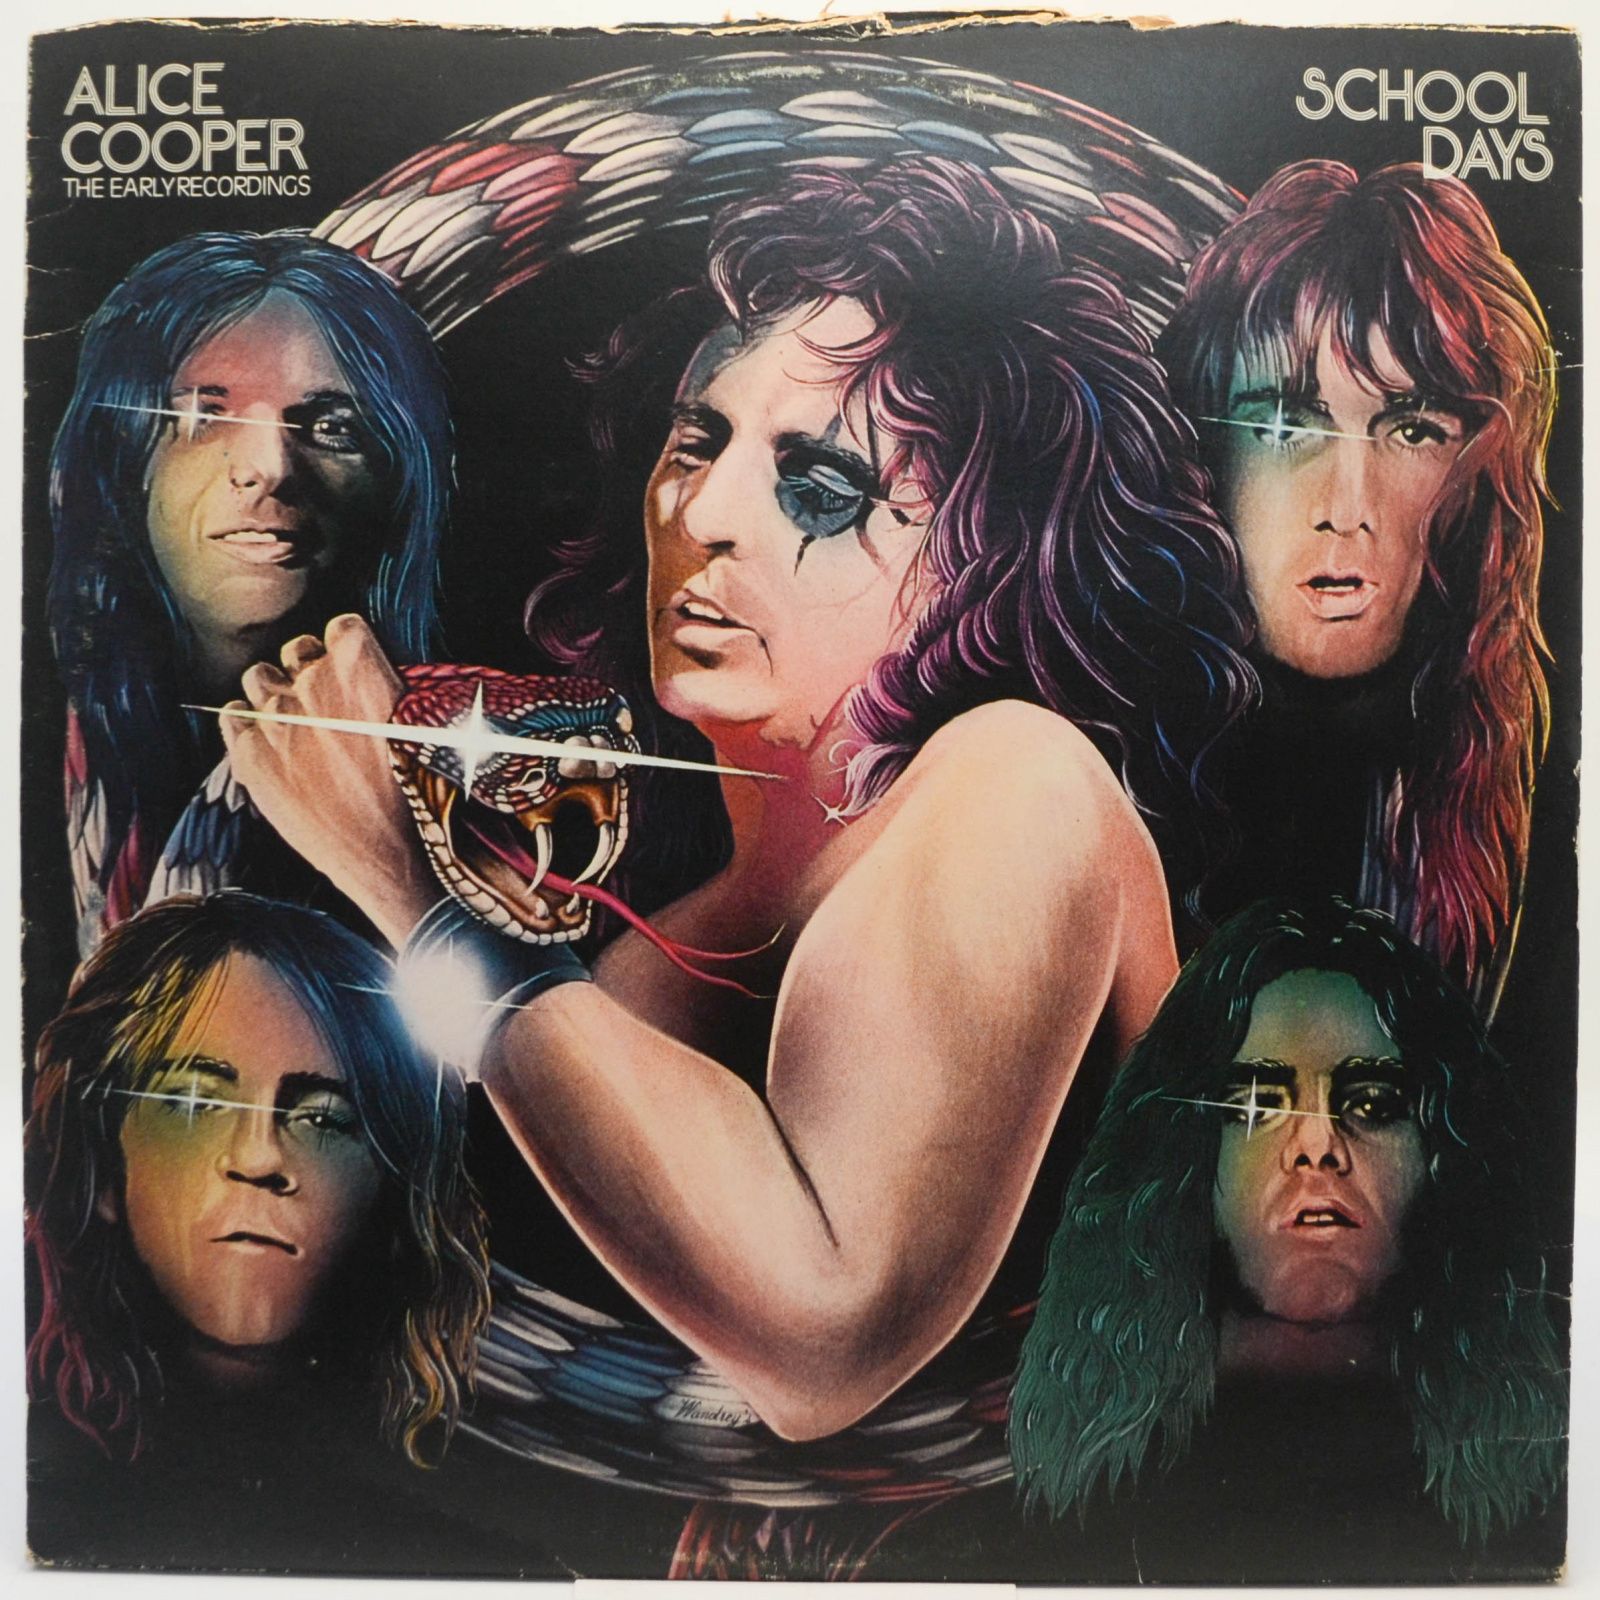 School Days - The Early Recordings (2LP), 1973